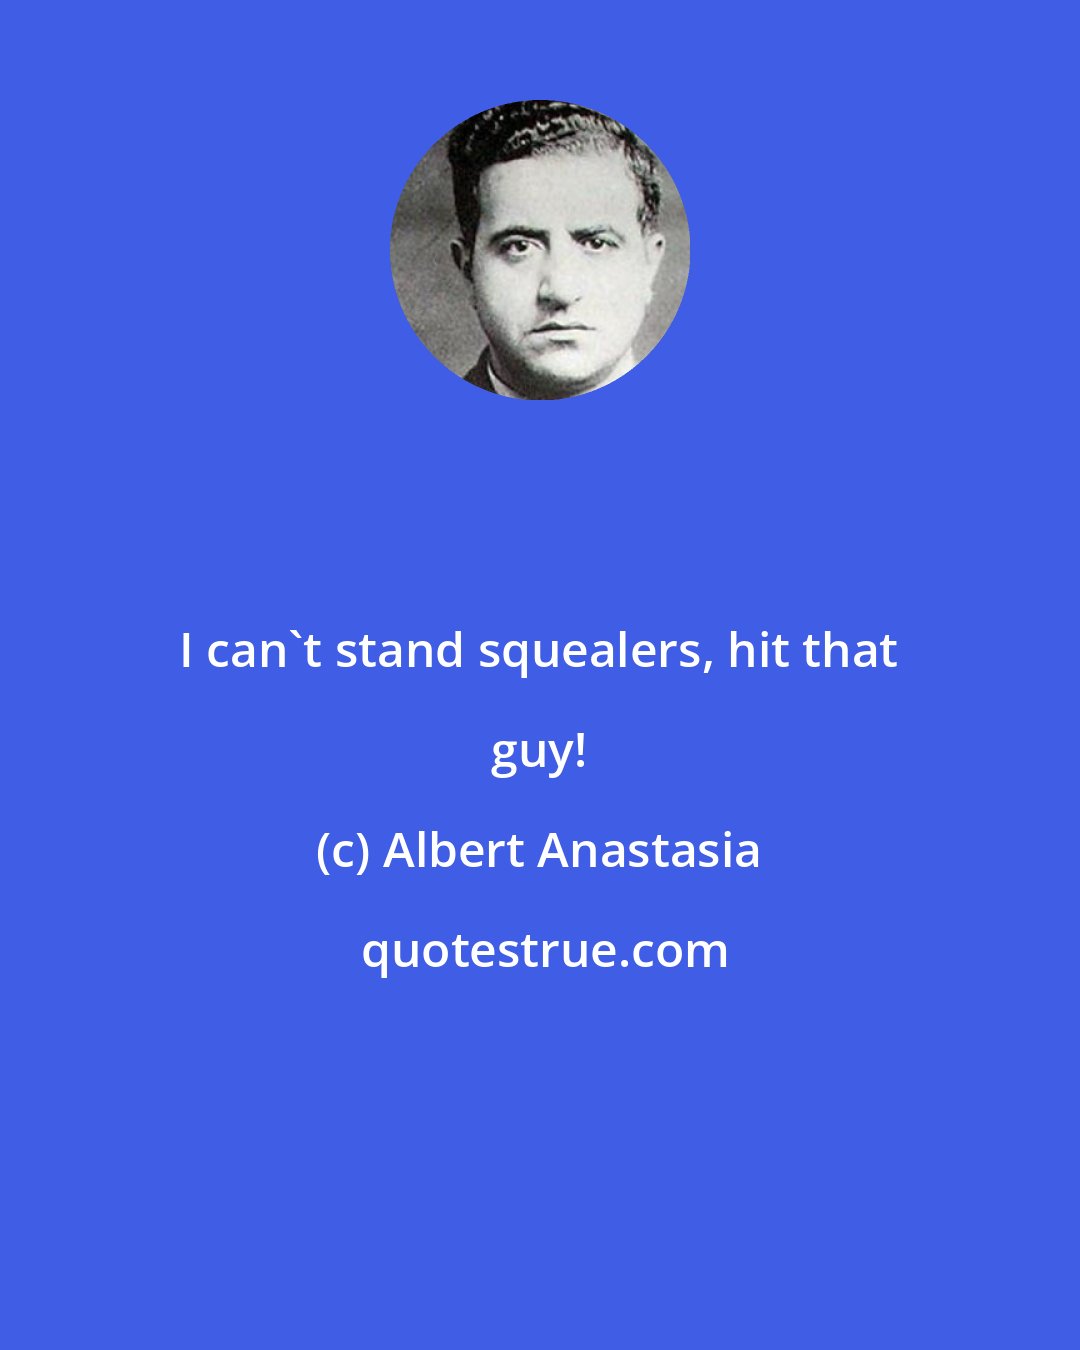 Albert Anastasia: I can't stand squealers, hit that guy!